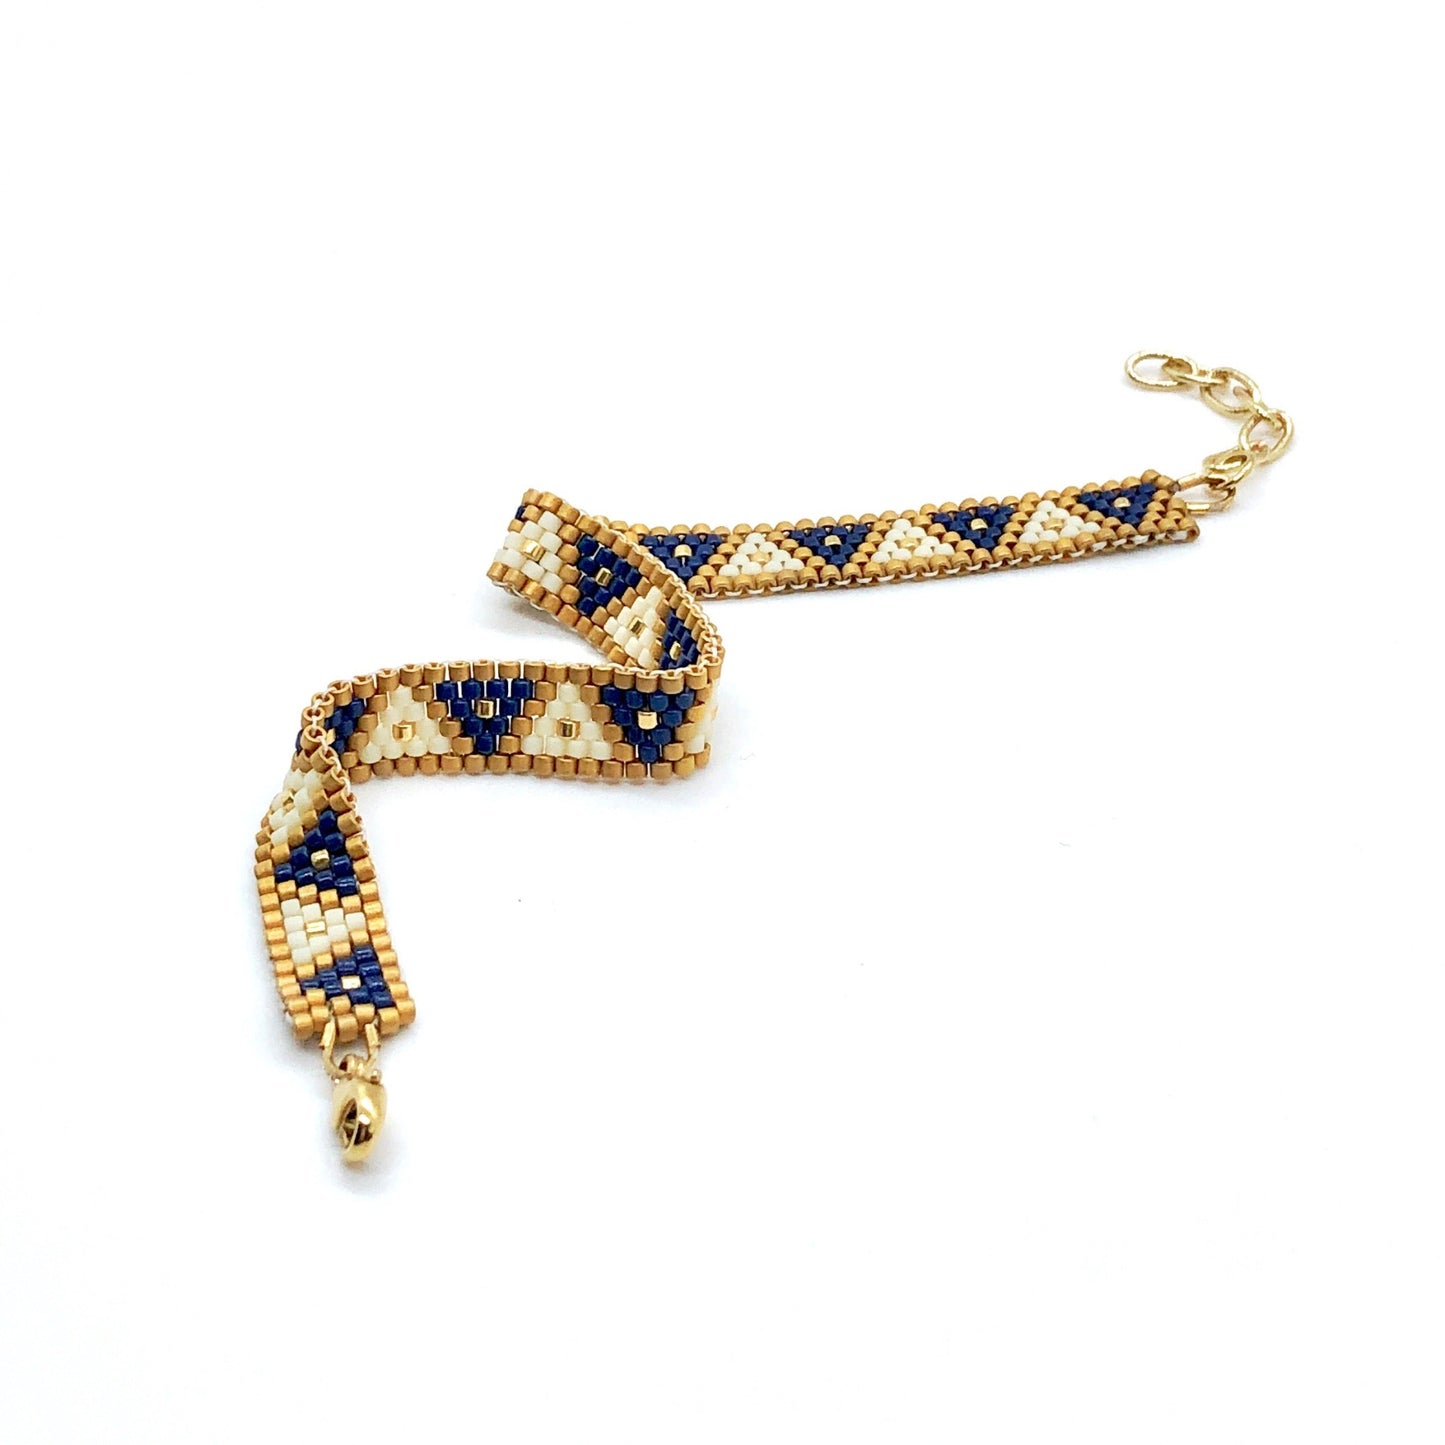 Modern geometric triangle beaded woven bracelet in nautical navy, ivory, and gold color scheme.